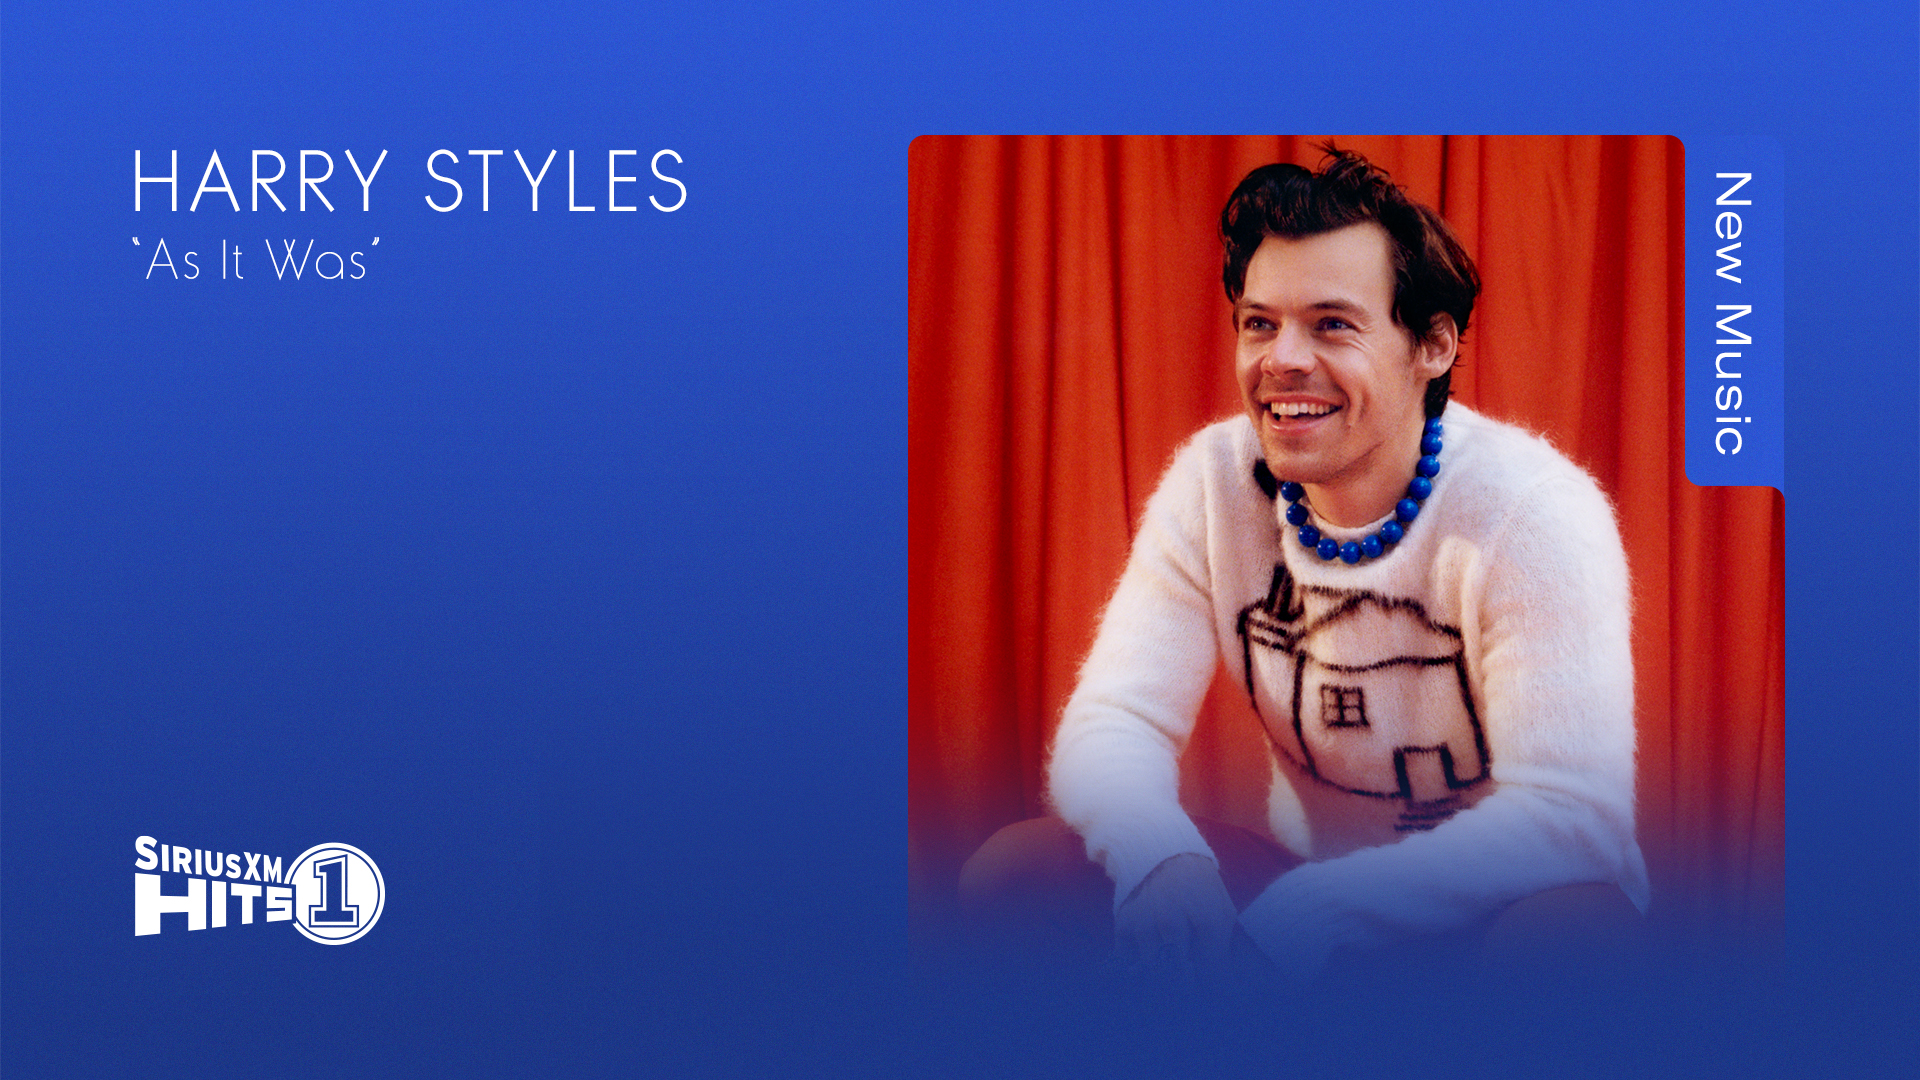 Harry Styles As It Was on SiriusXM Hits 1